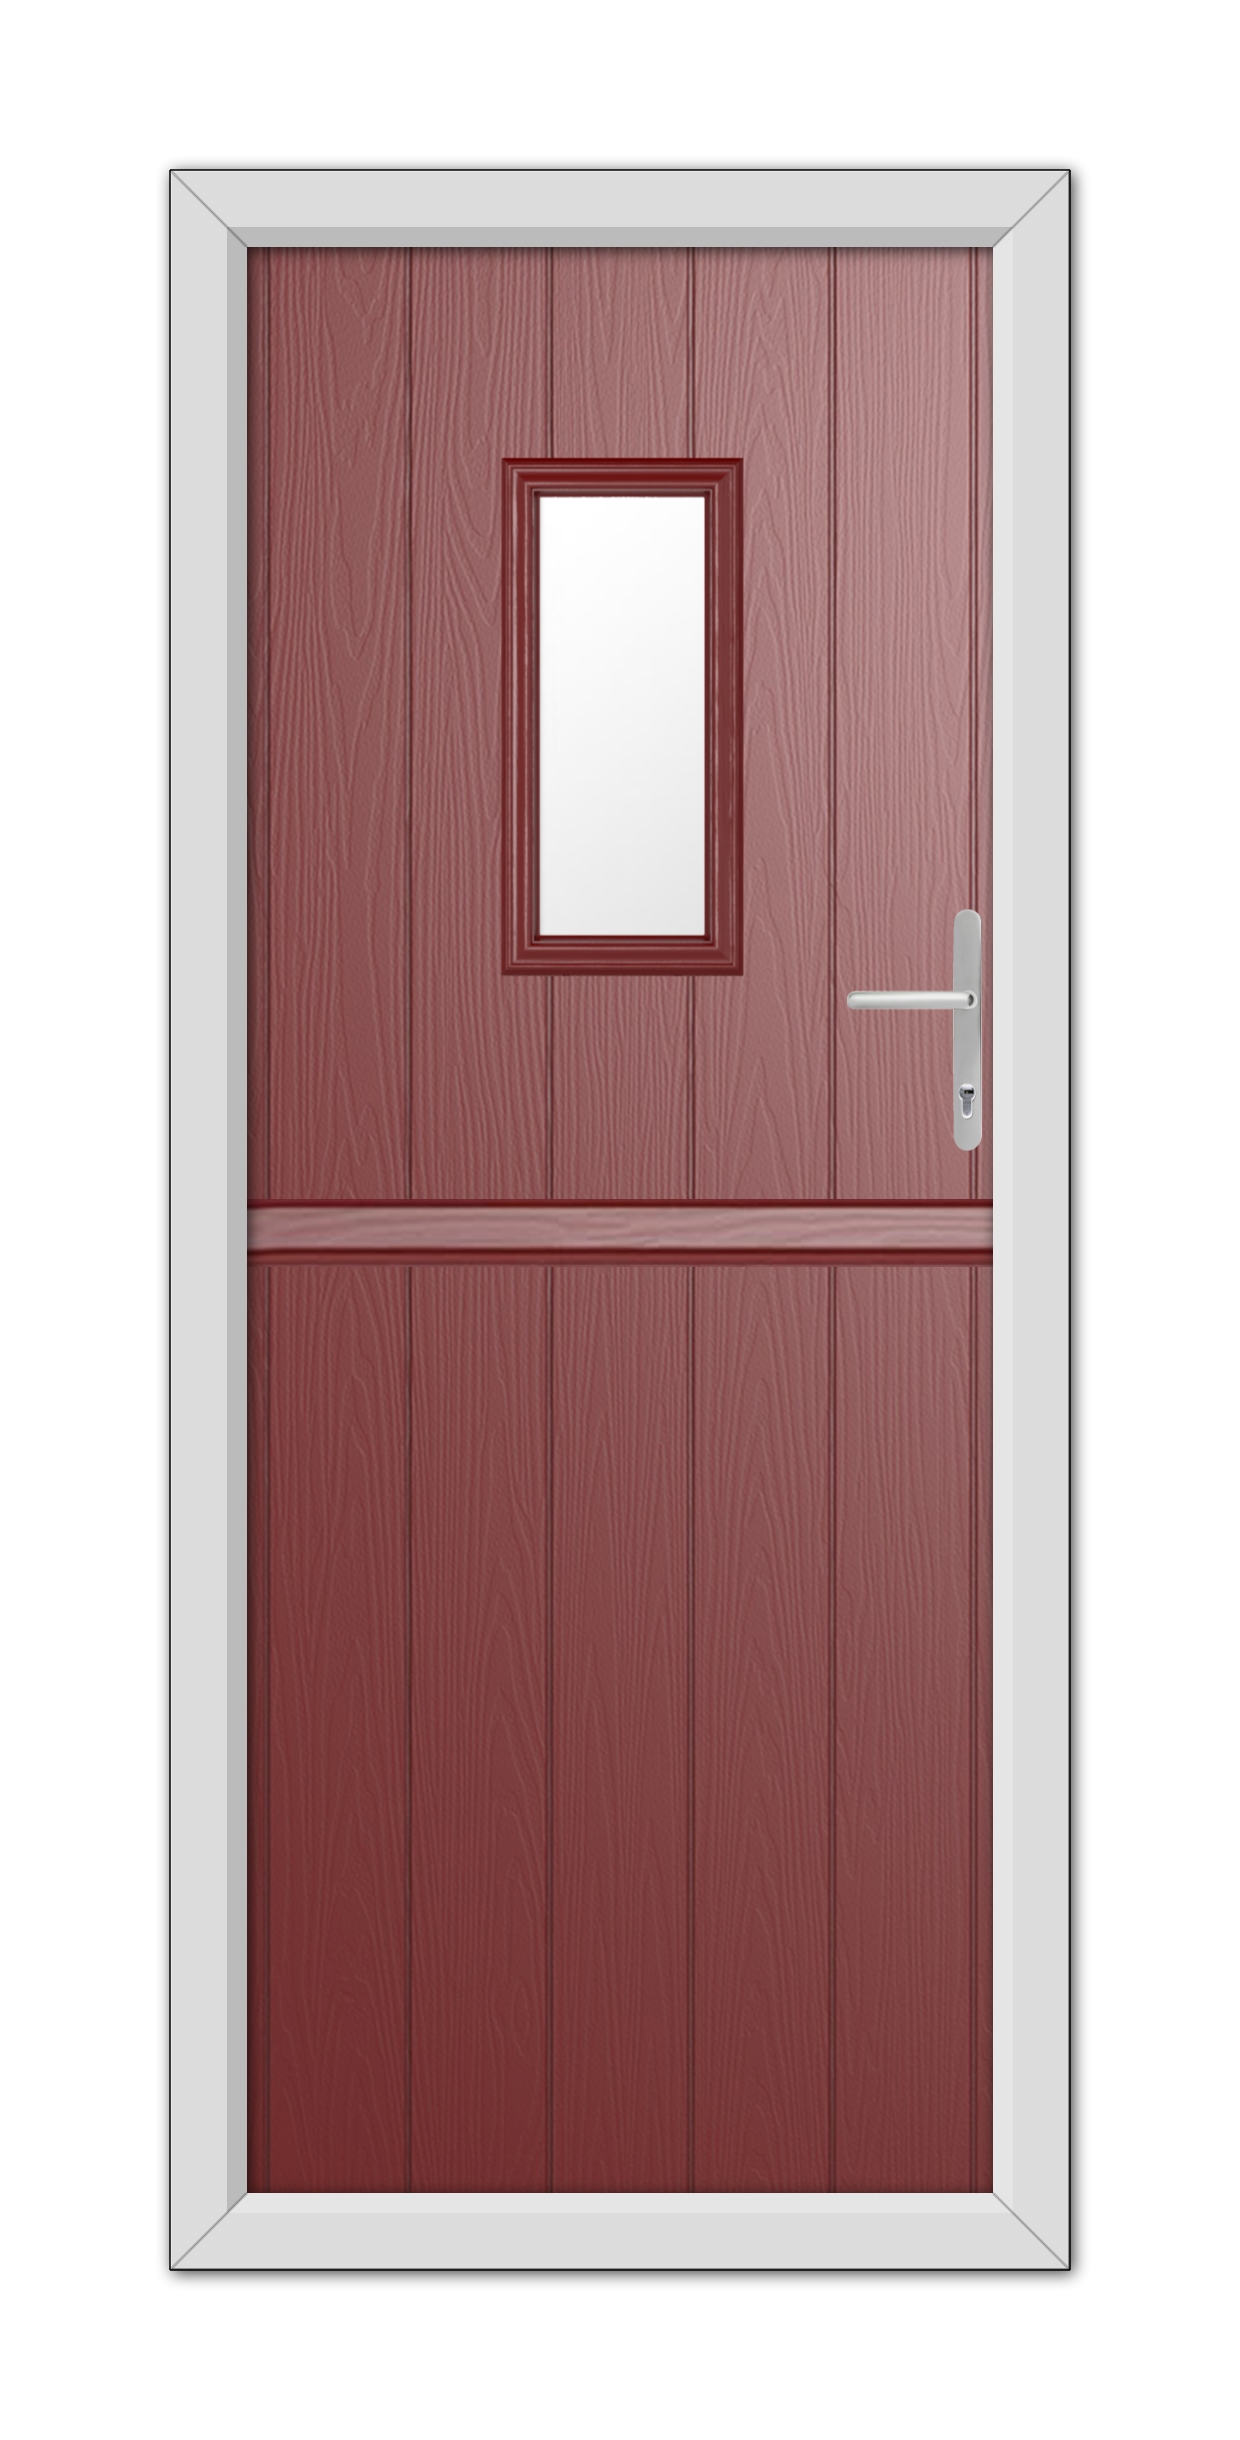 A modern Red Somerset Stable Composite Door 48mm Timber Core with a small square window, framed in a white door frame, and equipped with a metallic handle on the right side.